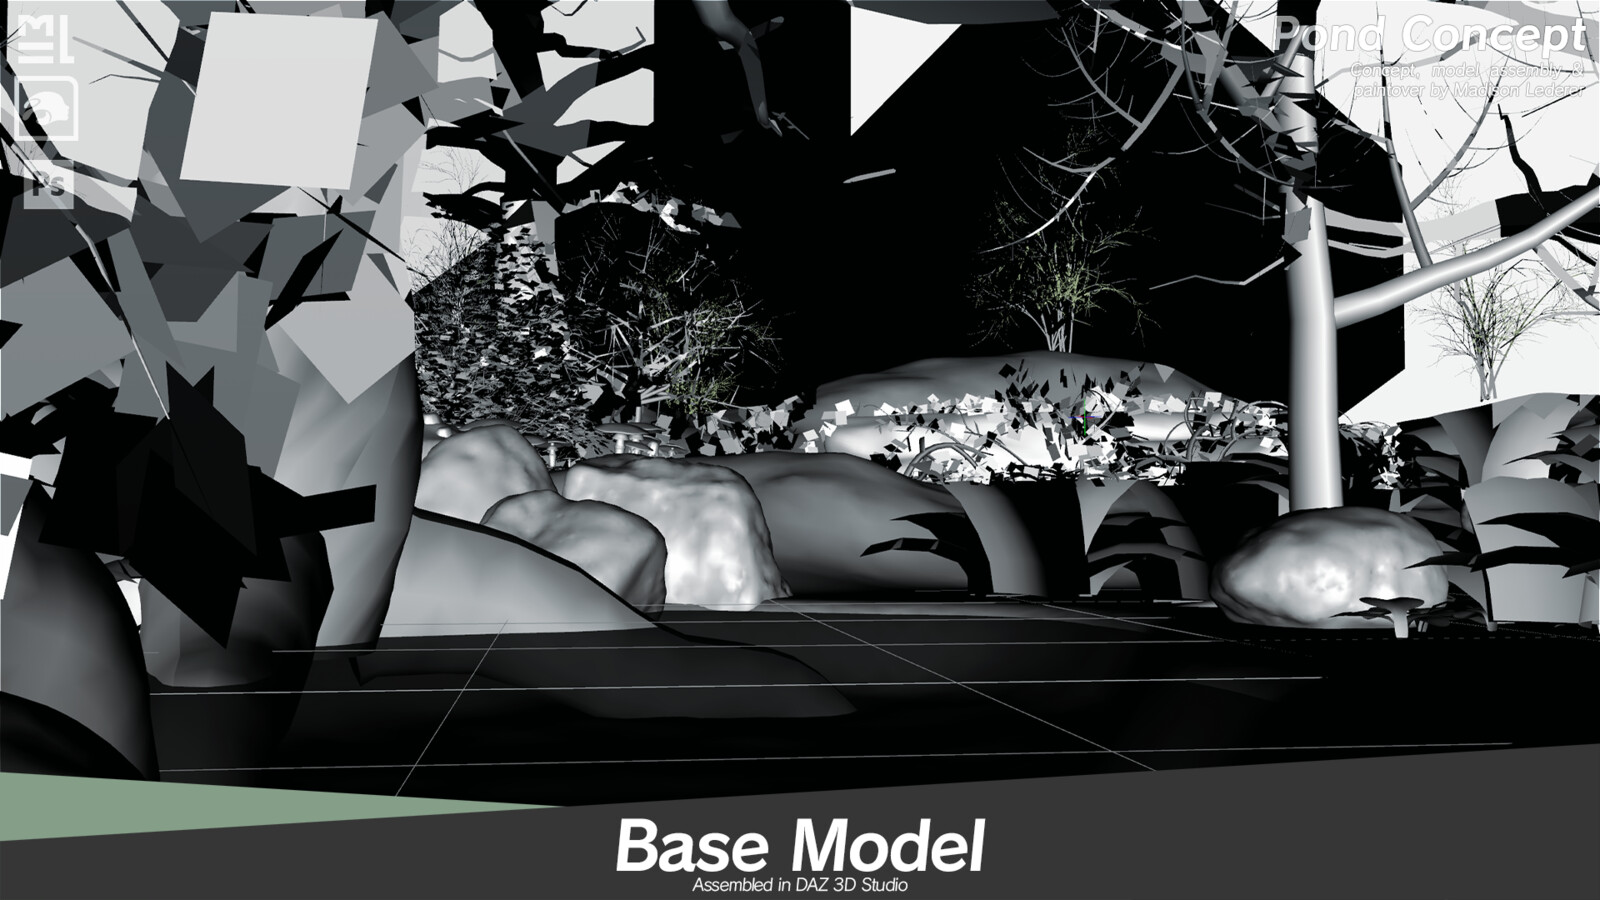 The base model assembled with assets in DAZ Studio.